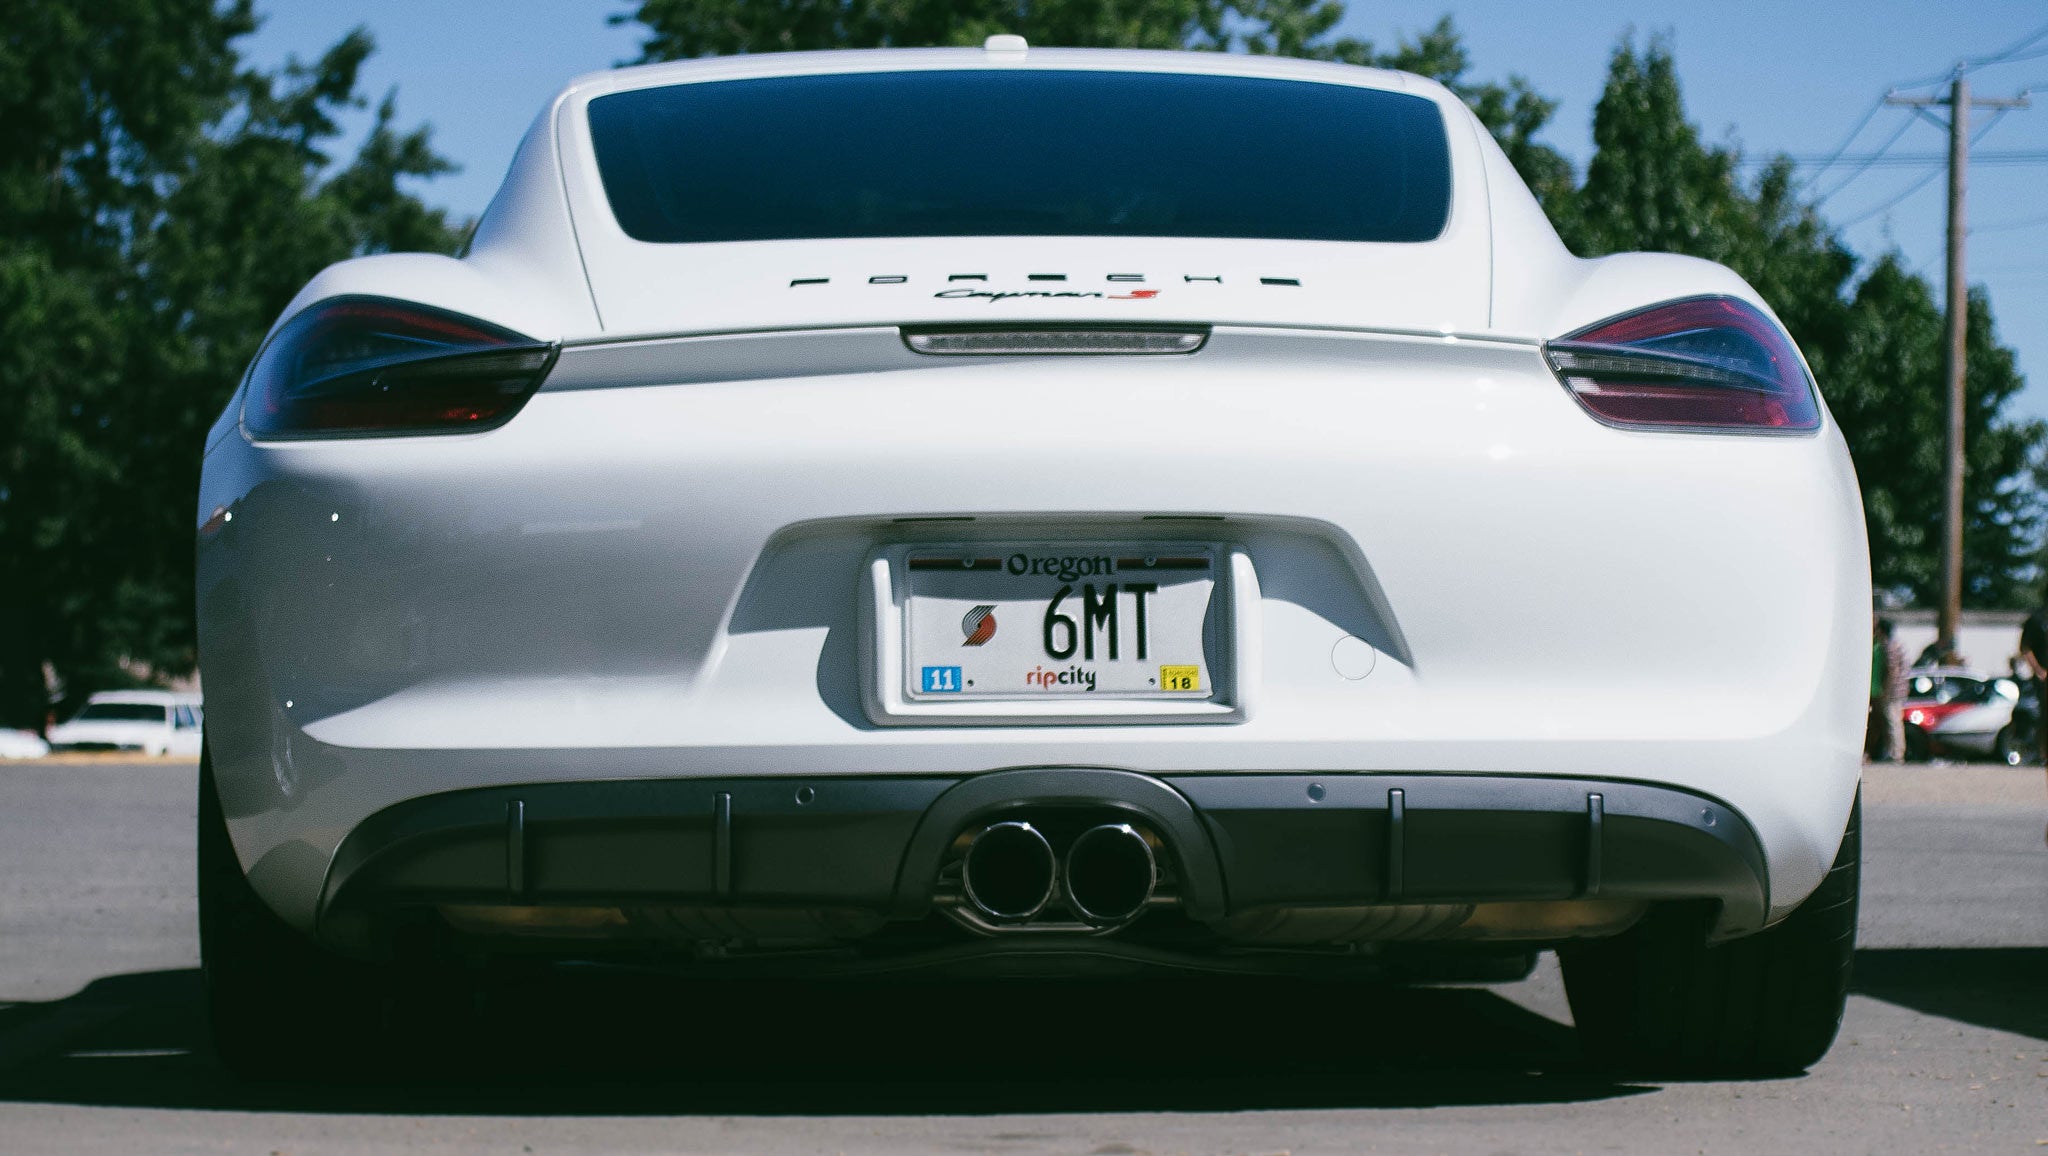 981 Cayman S Rear Shot Featuring Diffuser